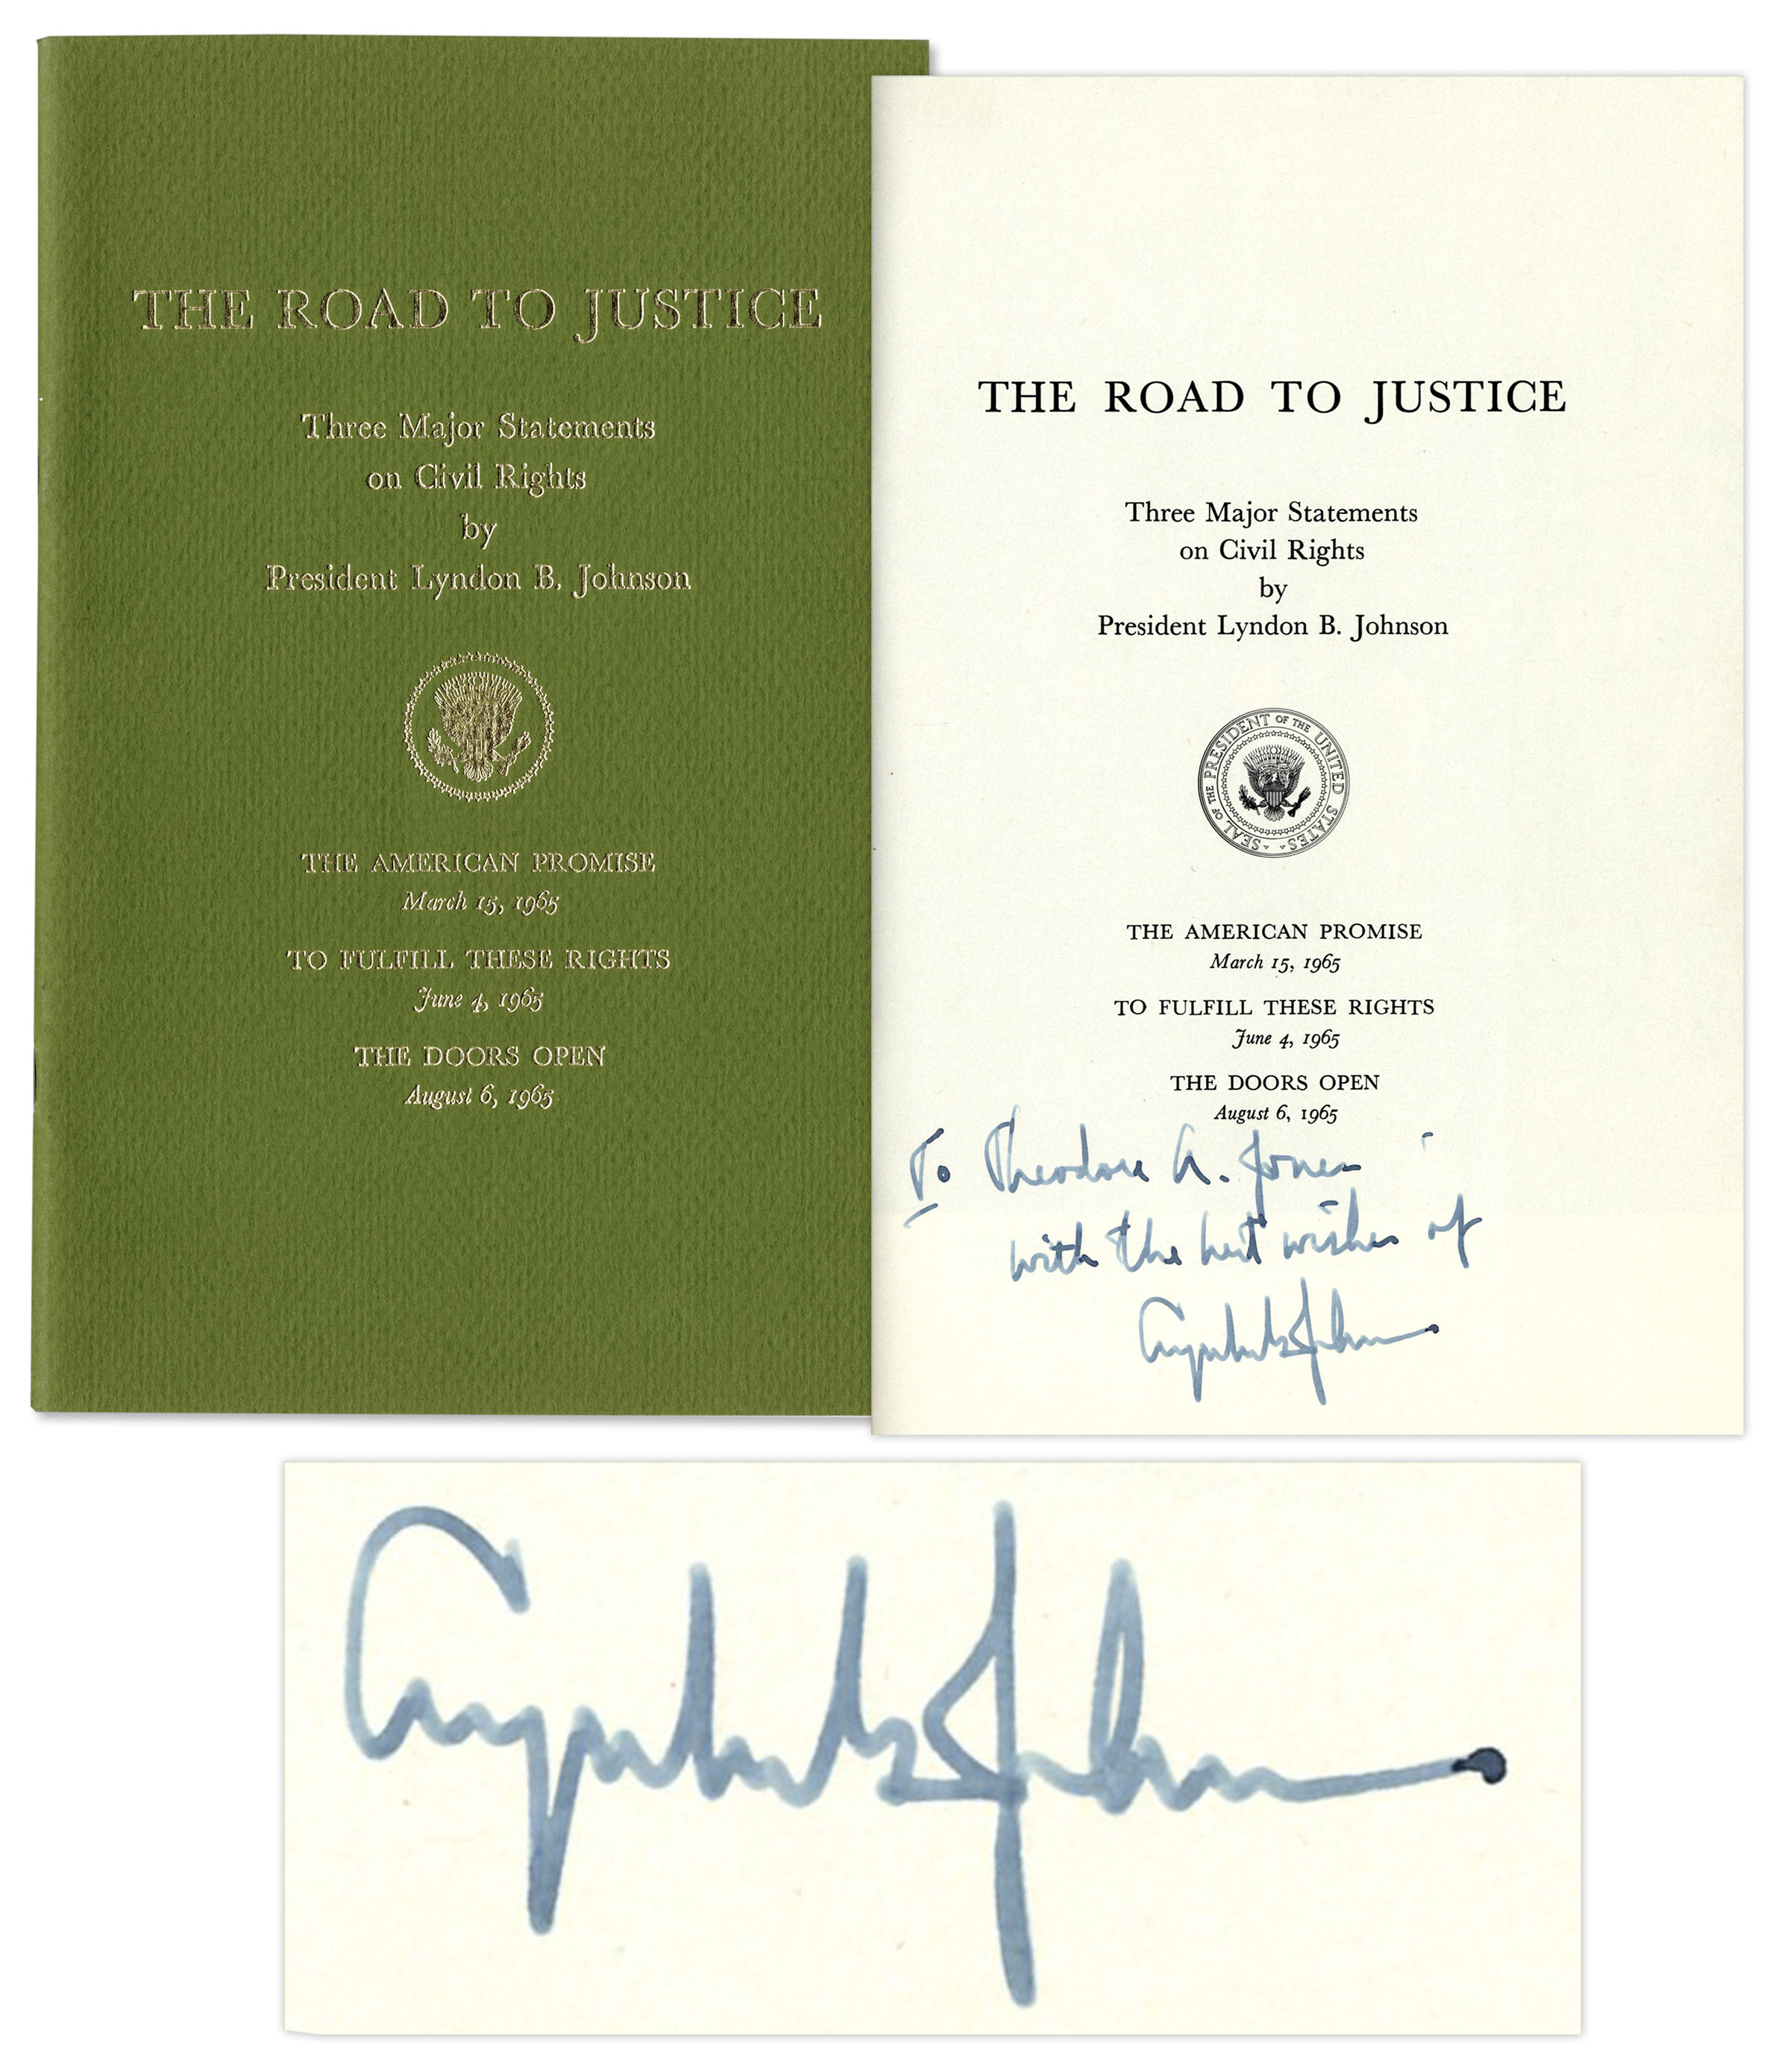 lot-detail-lyndon-b-johnson-signed-copy-of-his-civil-rights-speeches